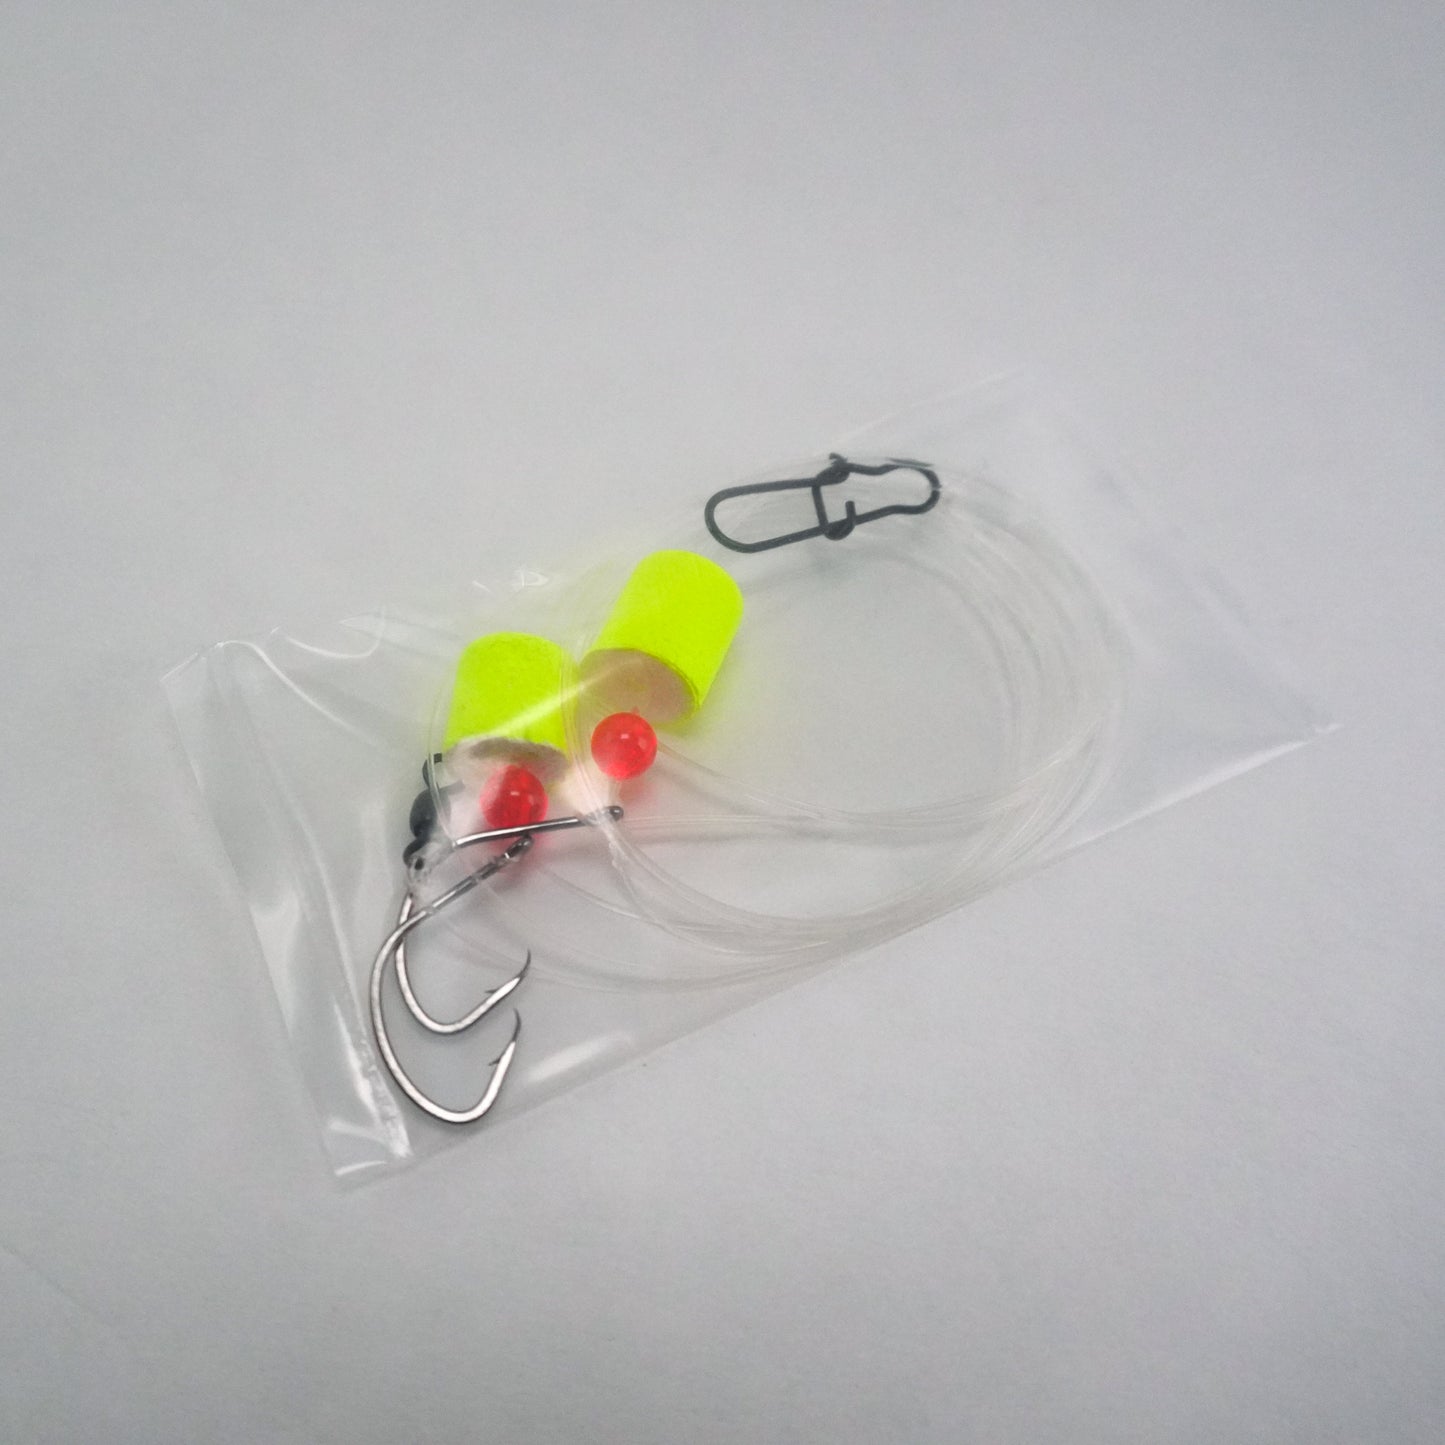 Pompano rig with Float (2pk) – South Florida Fishing Channel